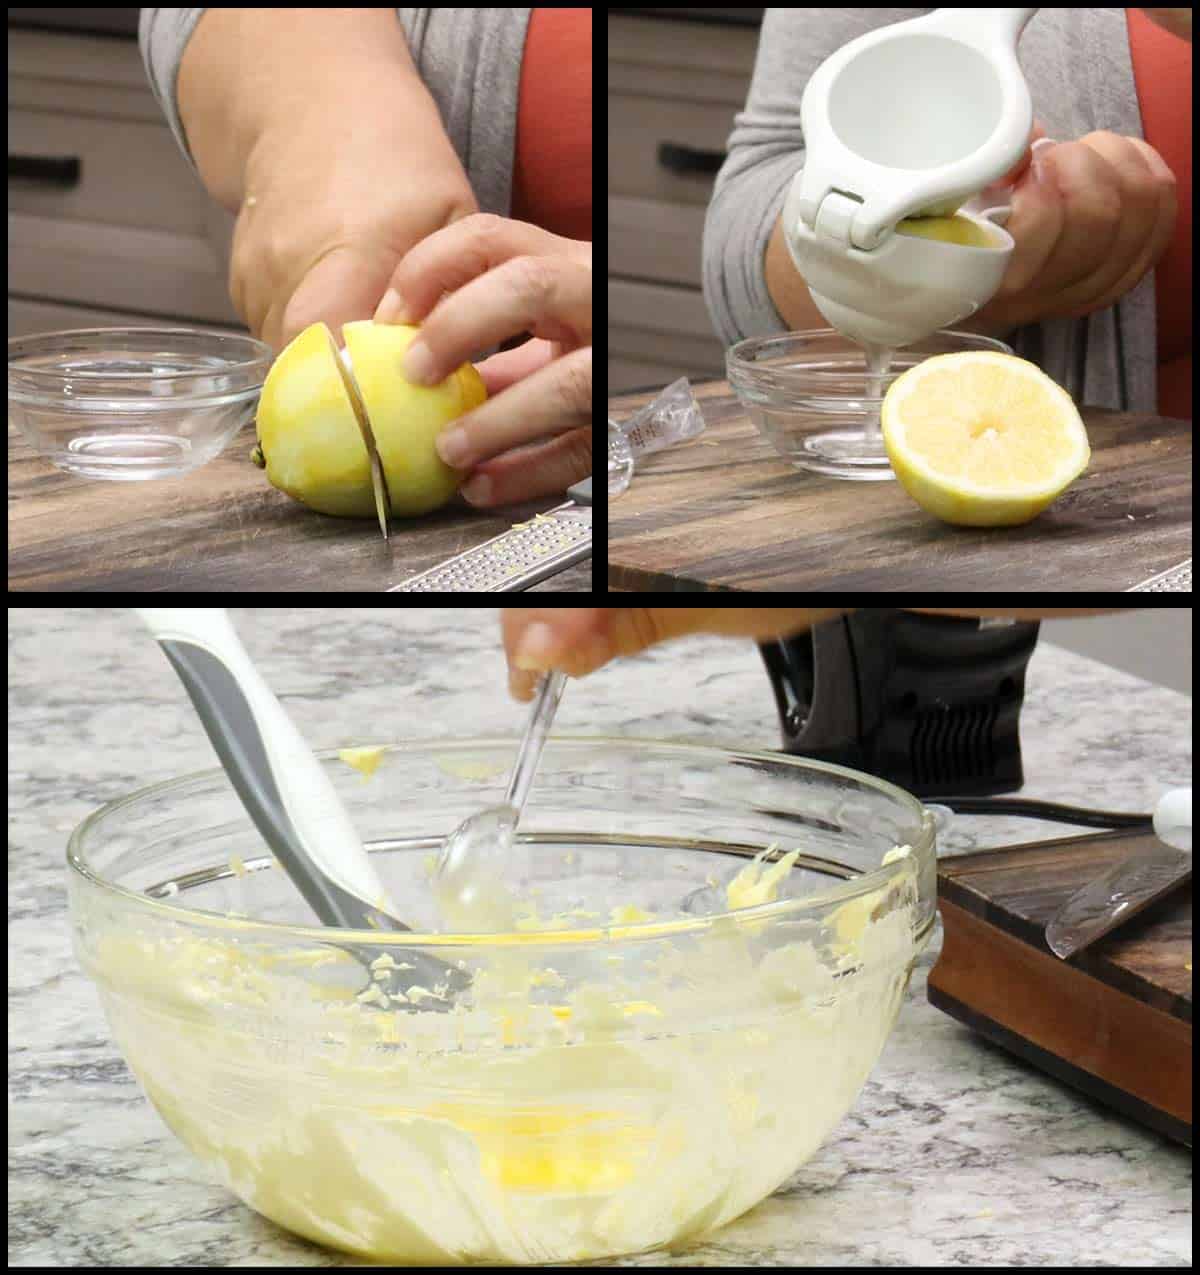 adding the lemon juice to the butter mixture.